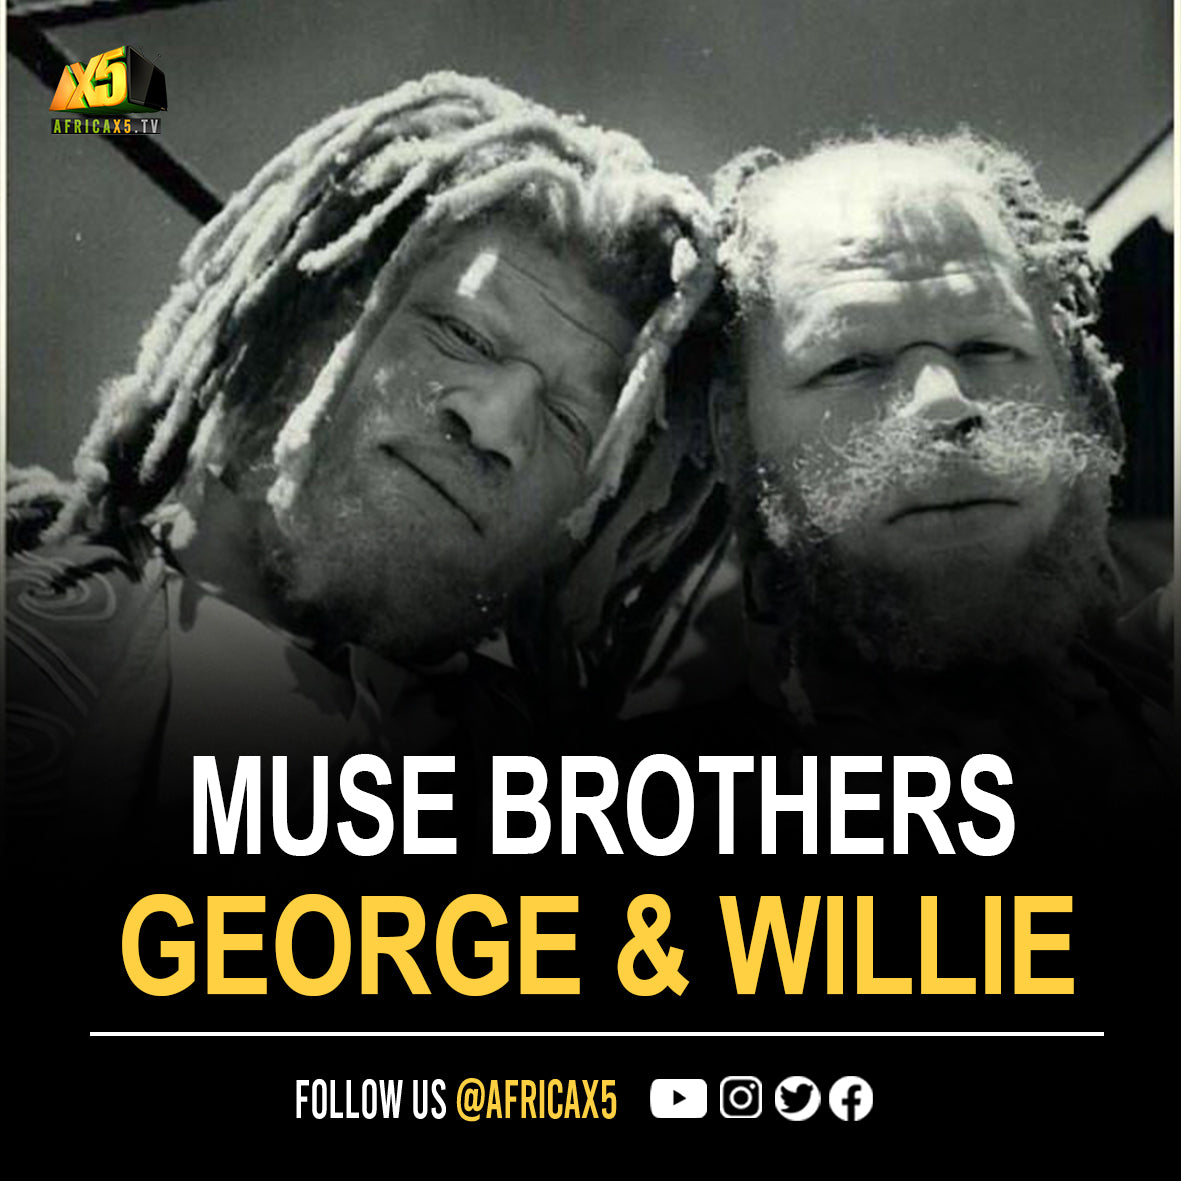 These are the Muse Brothers. Their biological names are George and Willie Muse.